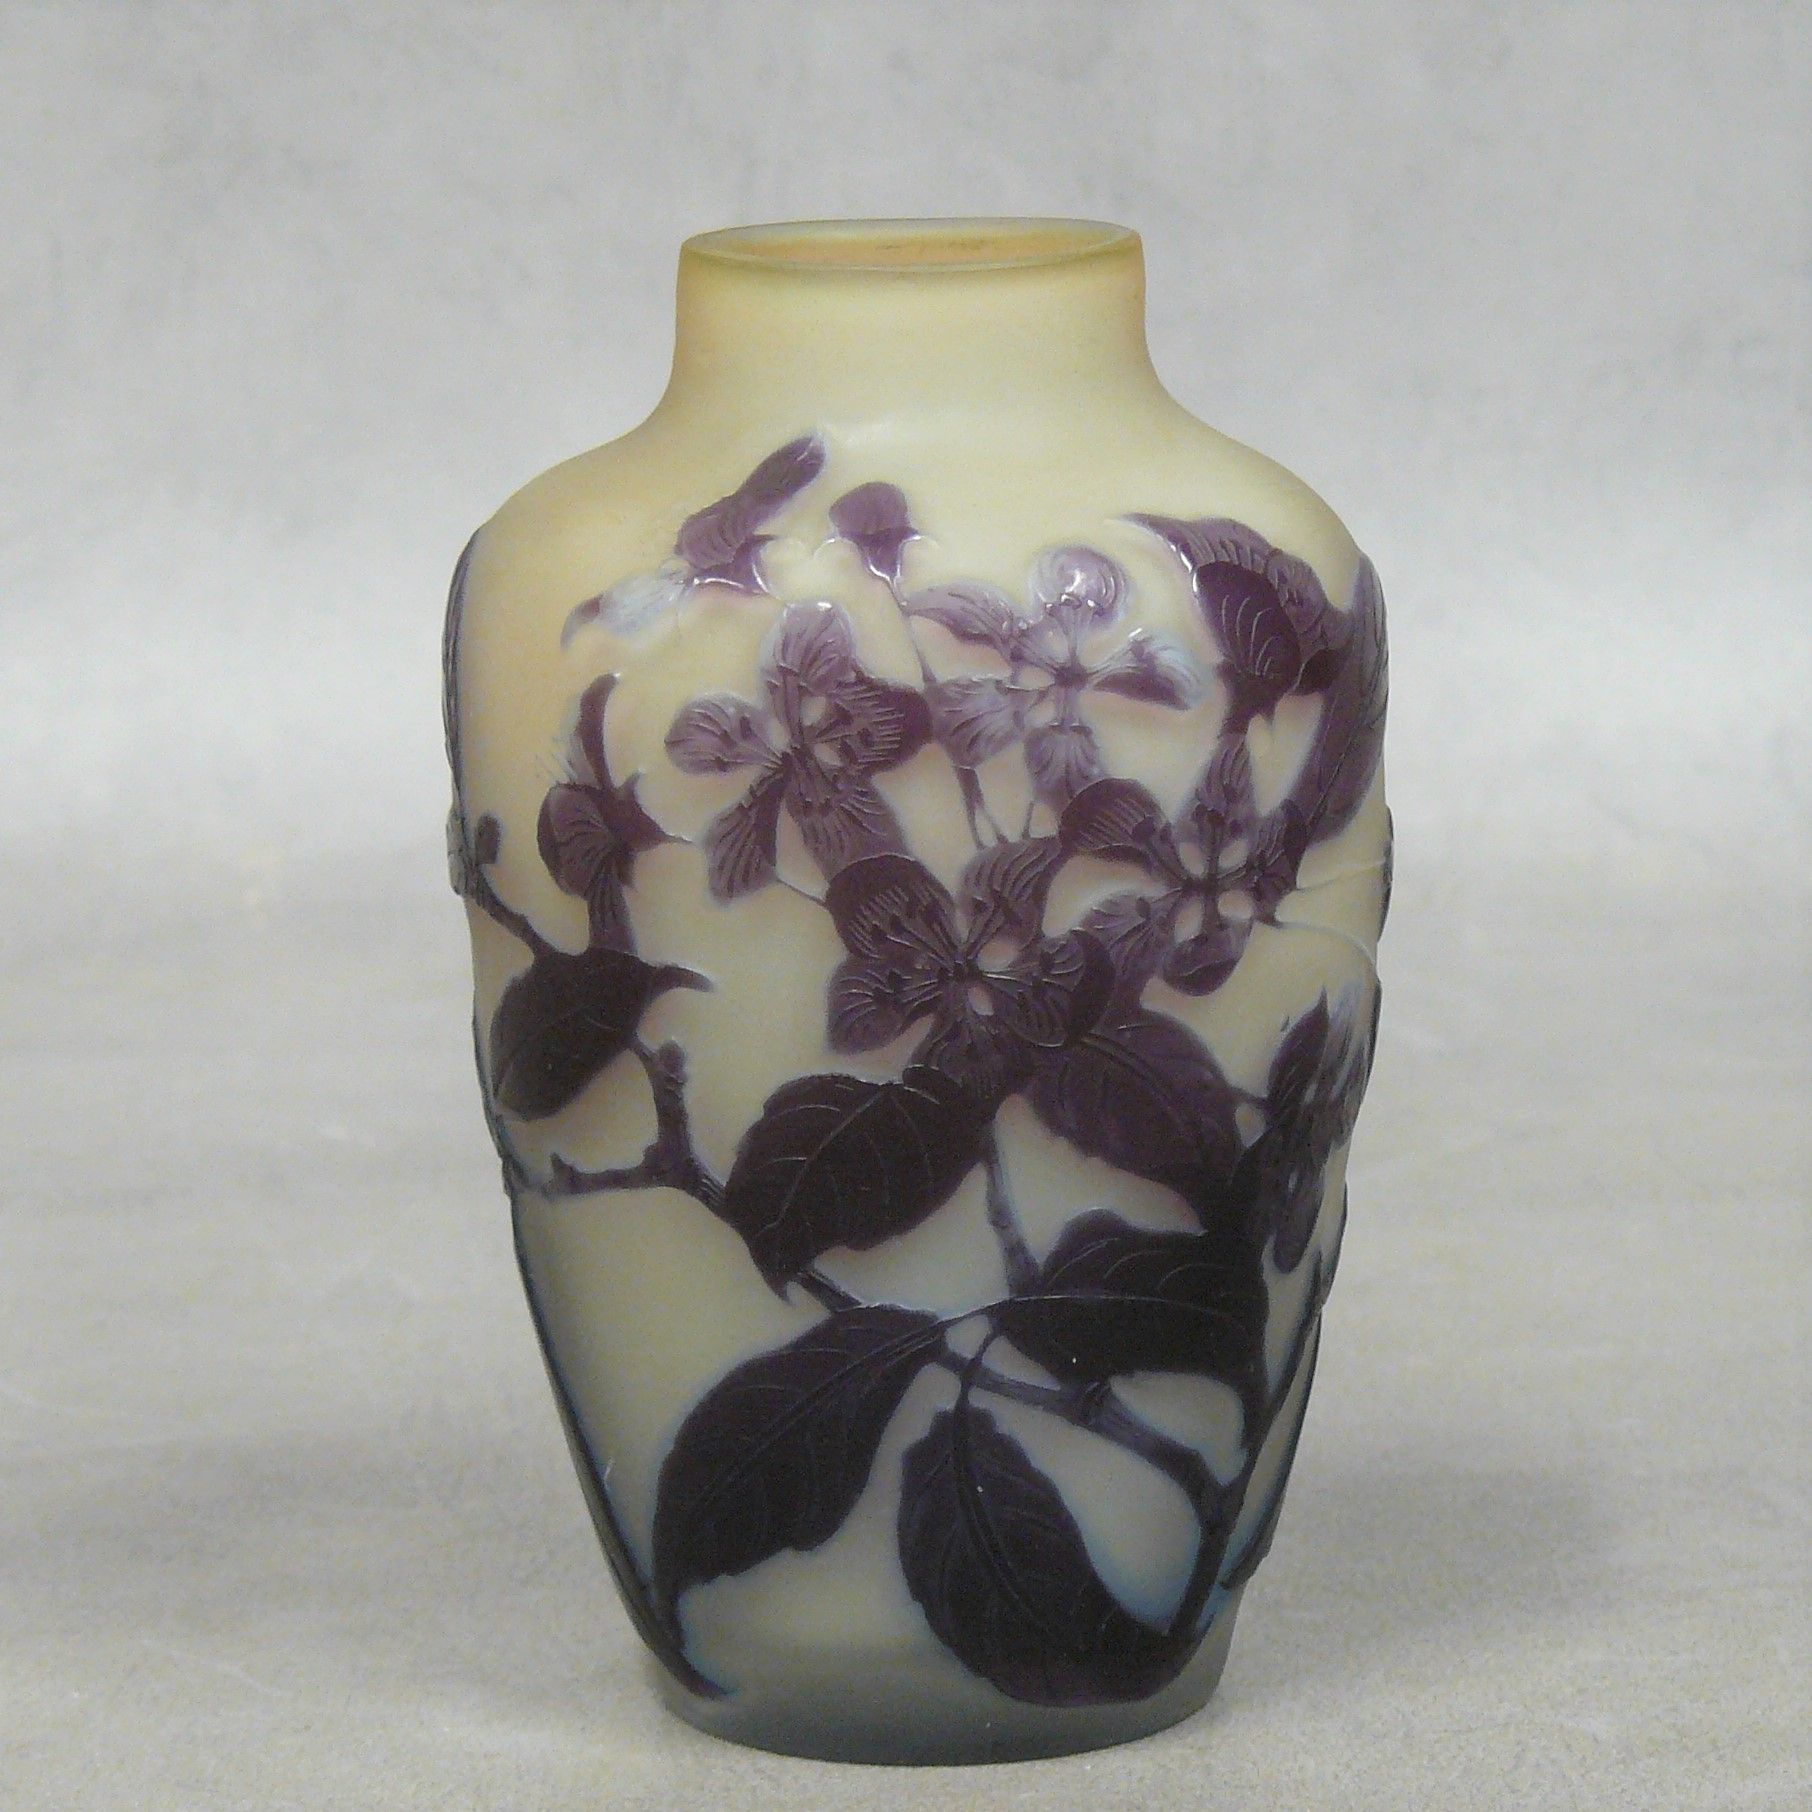 GALLE GALLÉ : cameo vase with a slightly flattened body and a decoration of purp&hellip;